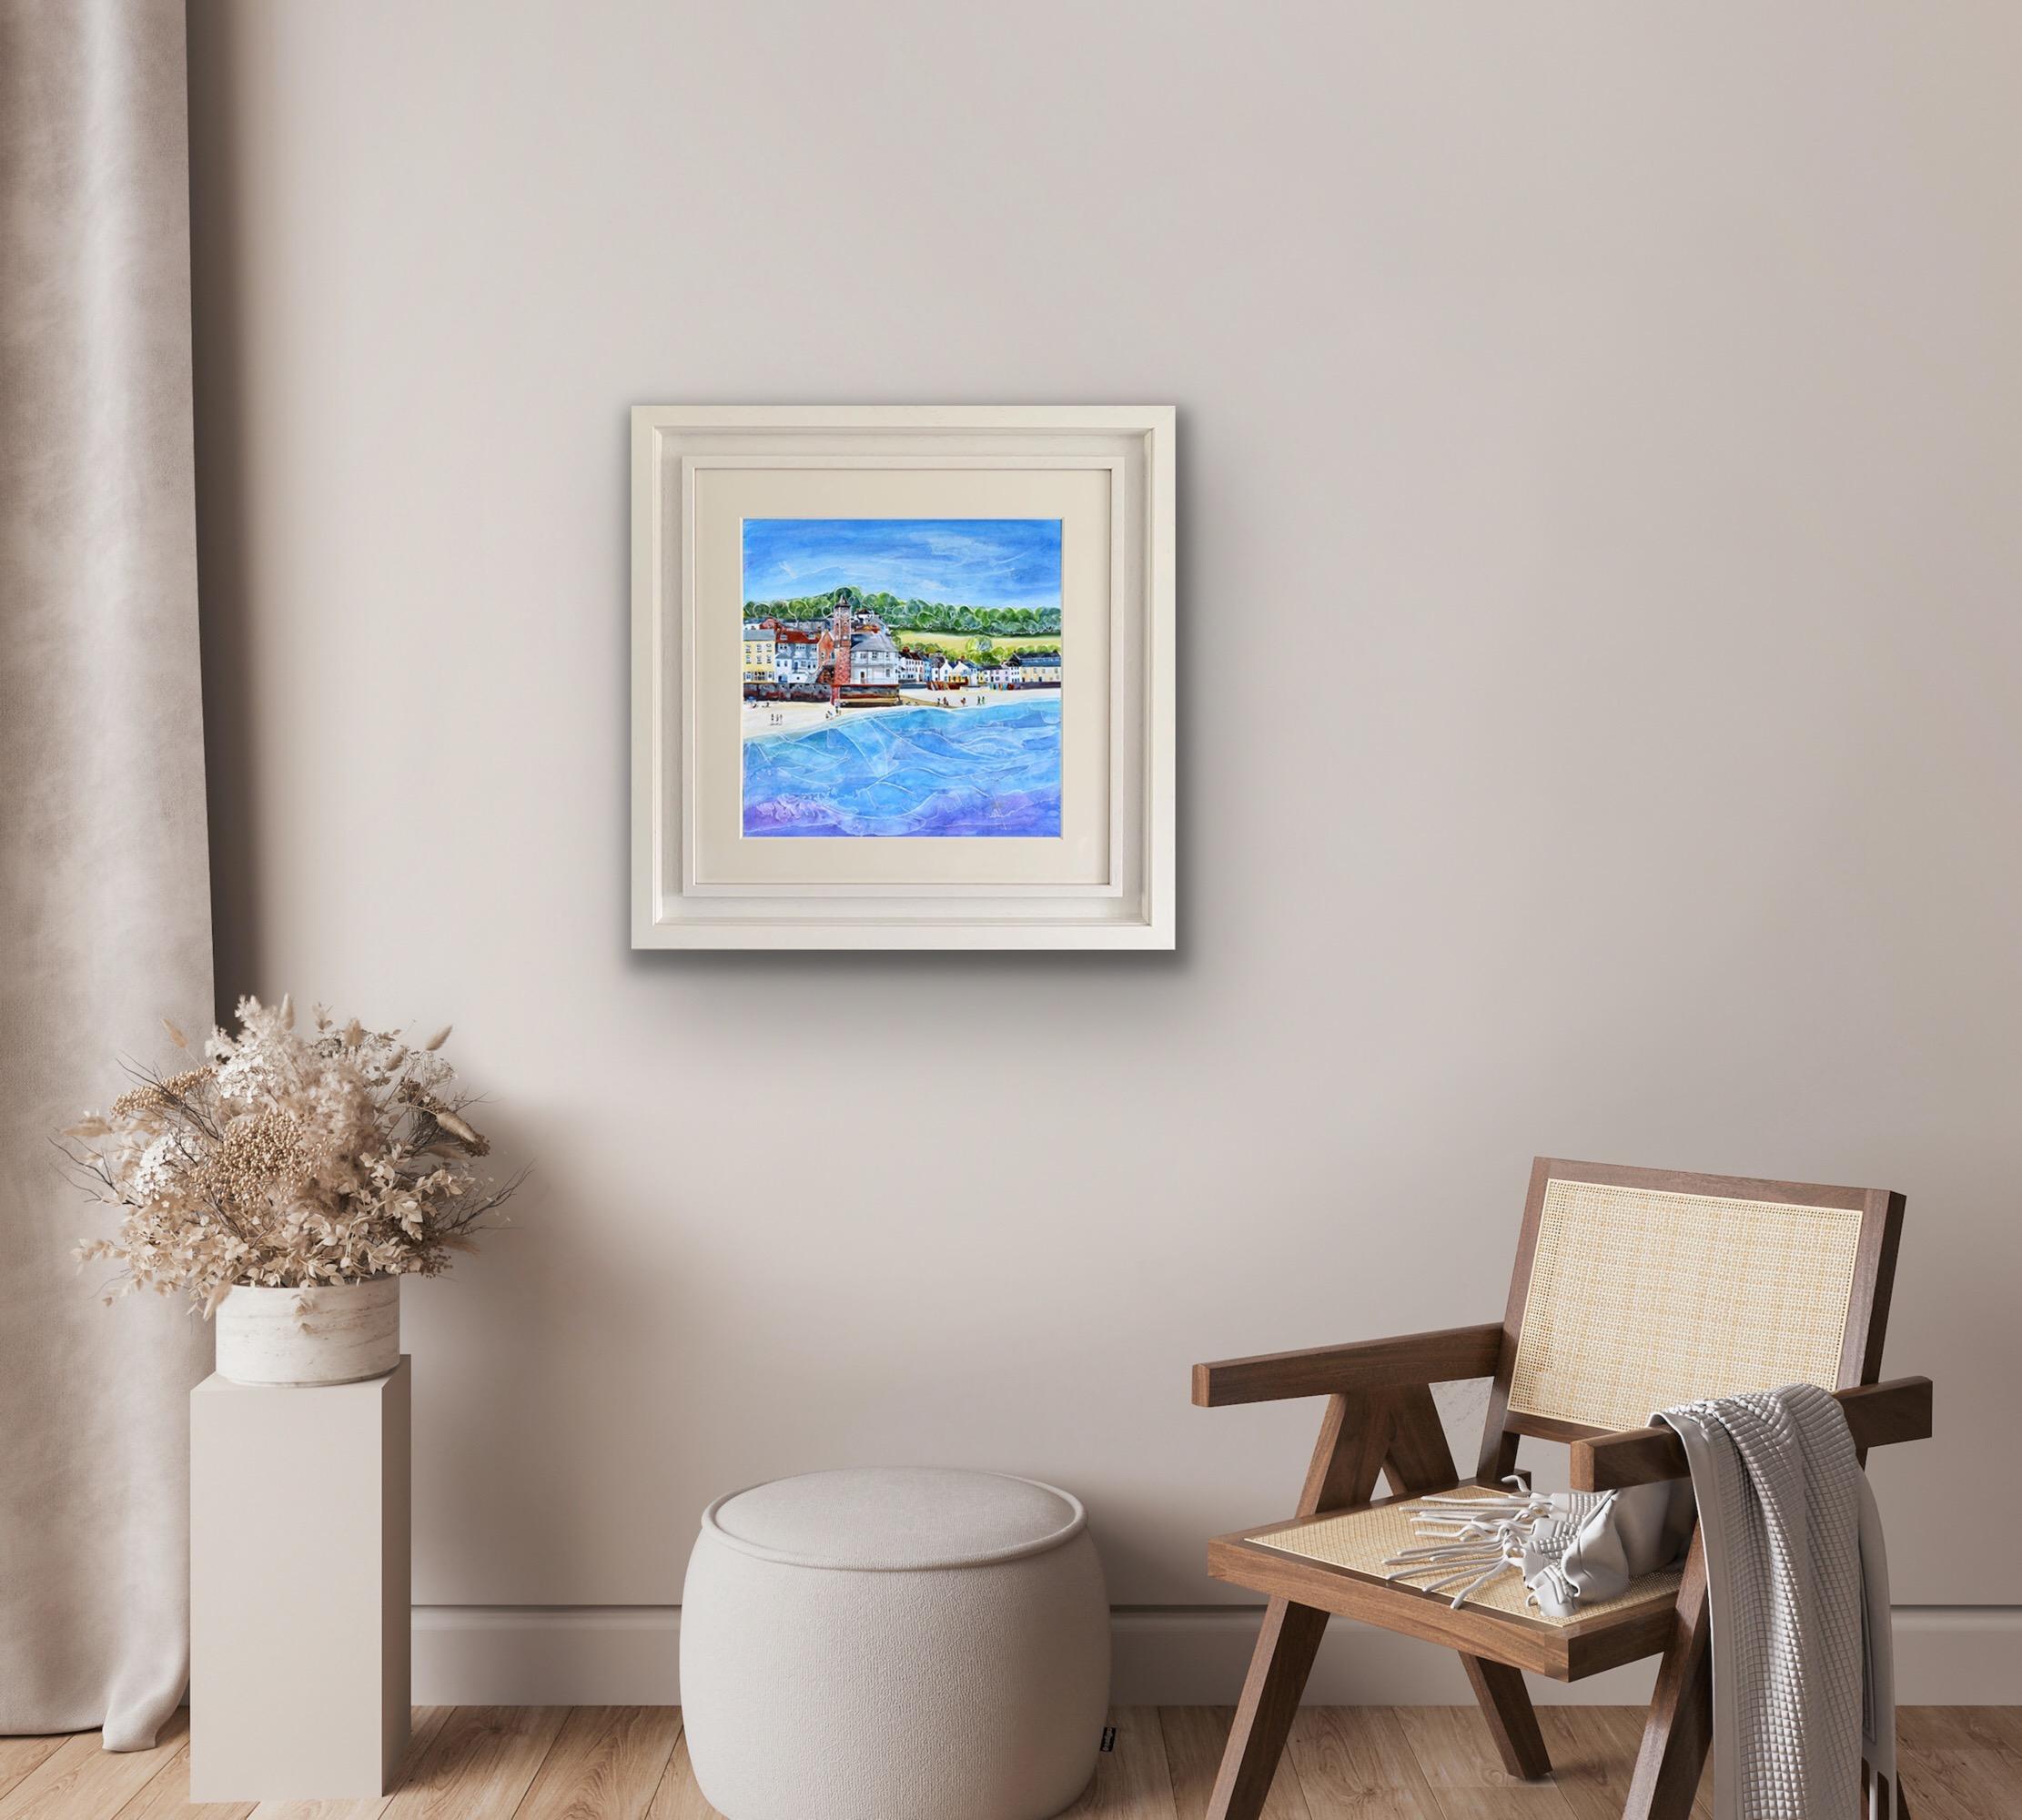 Kingsand, Cornwall by Anya Simmons [2020]
Please note that insitu images are purely an indication of how a piece may look

An original mixed media painting of Kingsand. Inspired by magical family holidays in Cornwall.

Discover limited edition